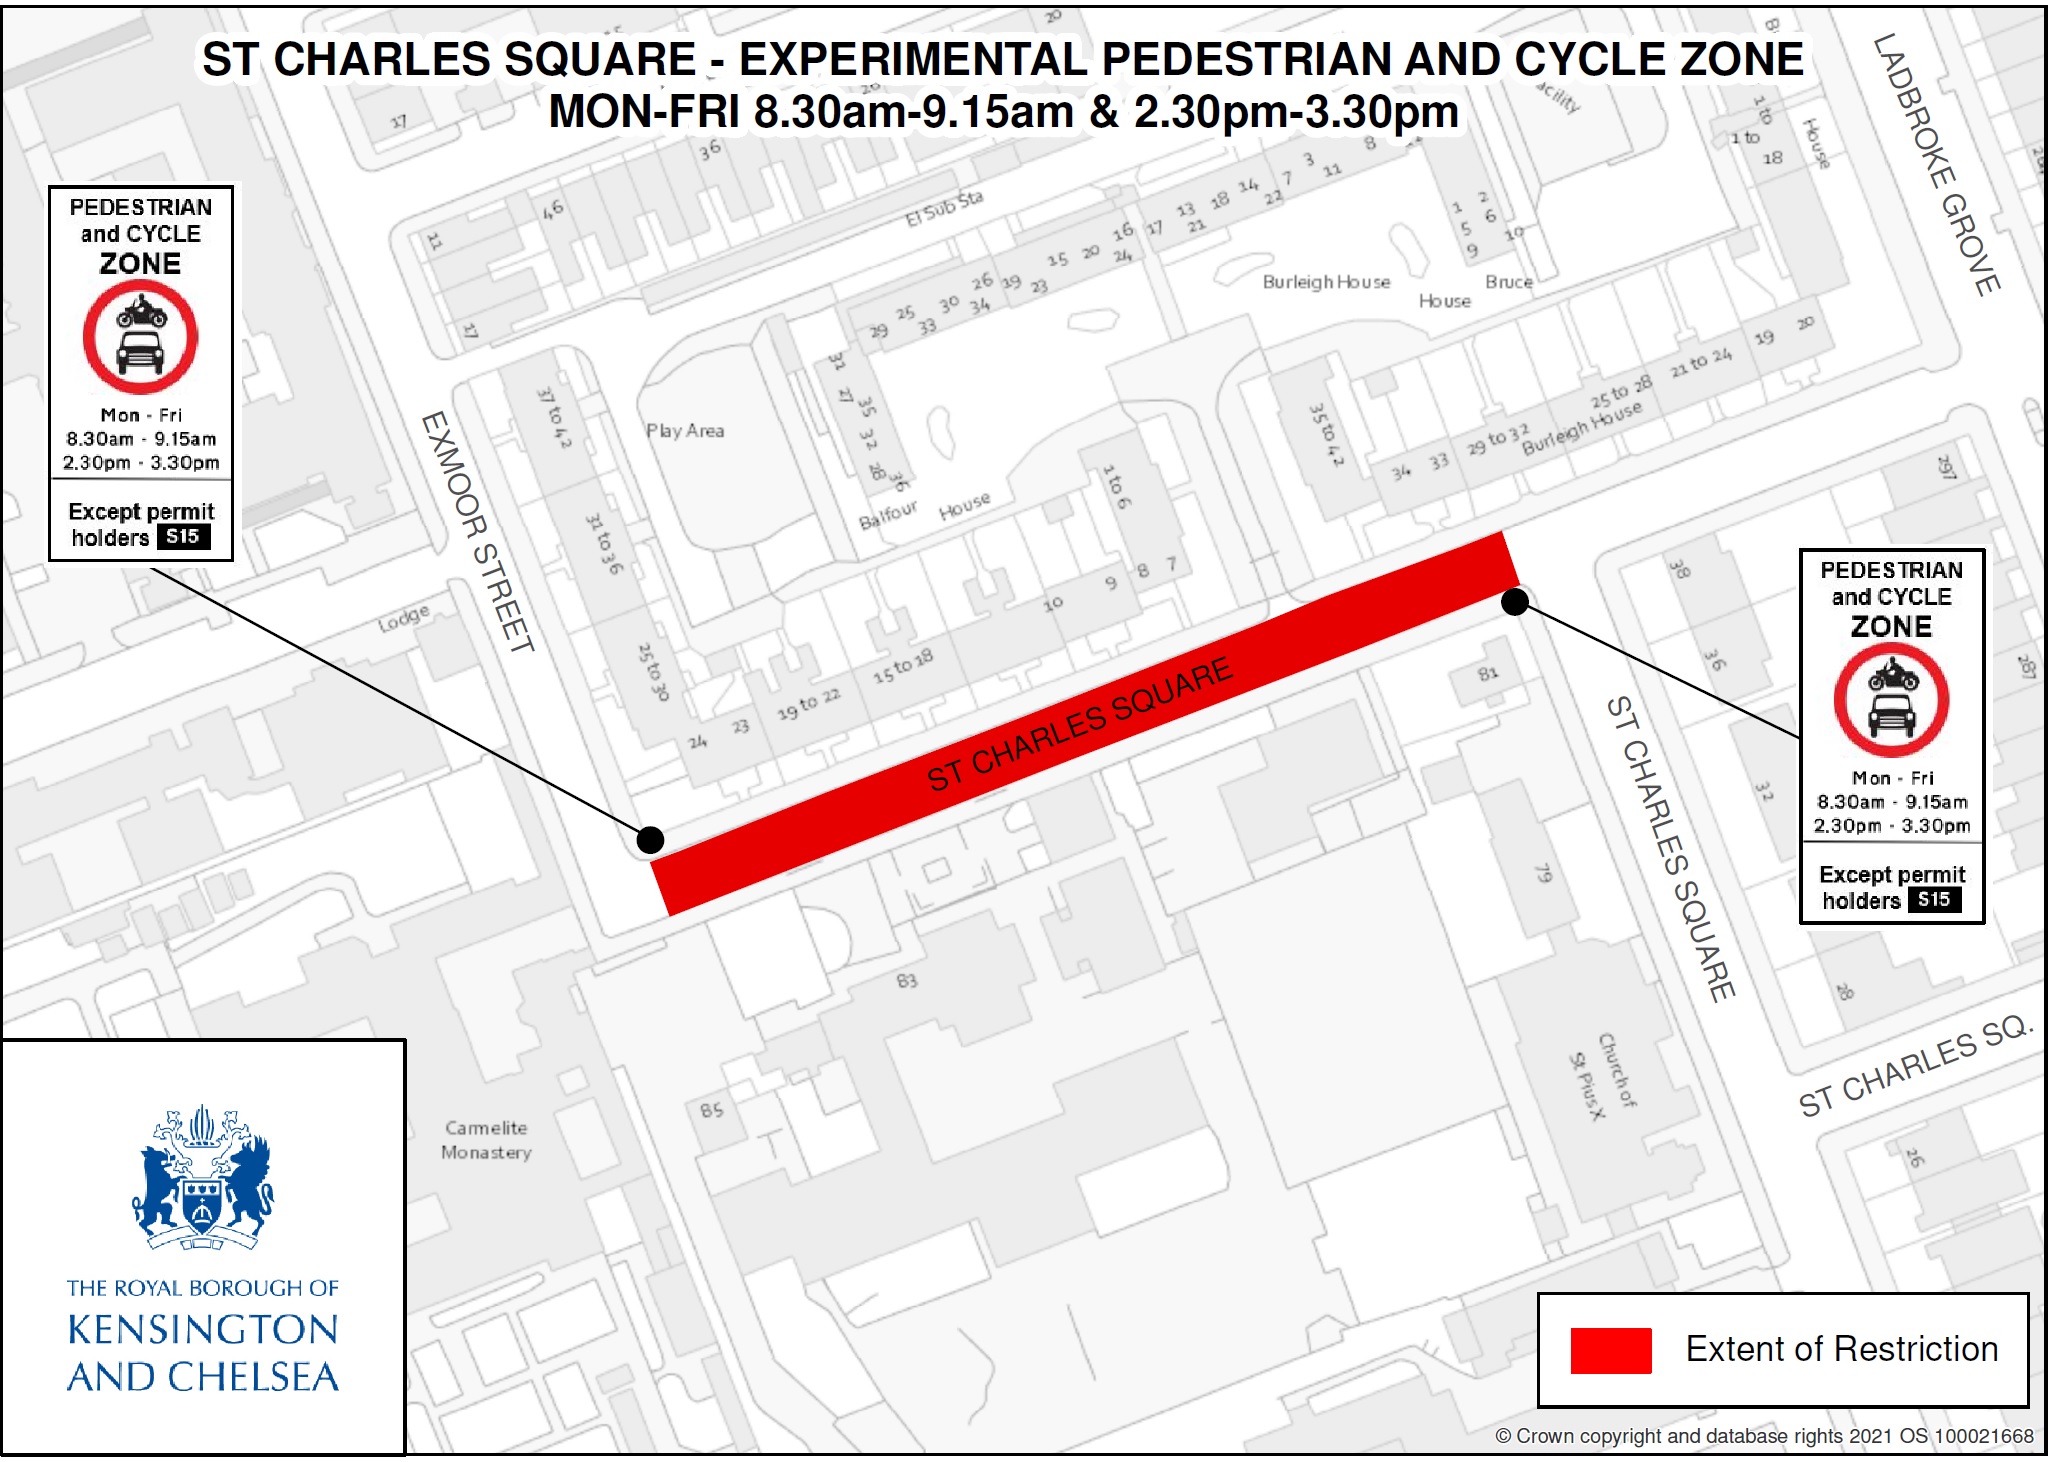 A map of the proposed closure area on St Charles Square (between 81 St Charles Square and the junction with Exmoor Street). The area would become a pedestrian and cycle zone (plus exempt vehicles) during school term between 8.30 to 9.15am and 2.30 to 3.30pm Monday to Friday.